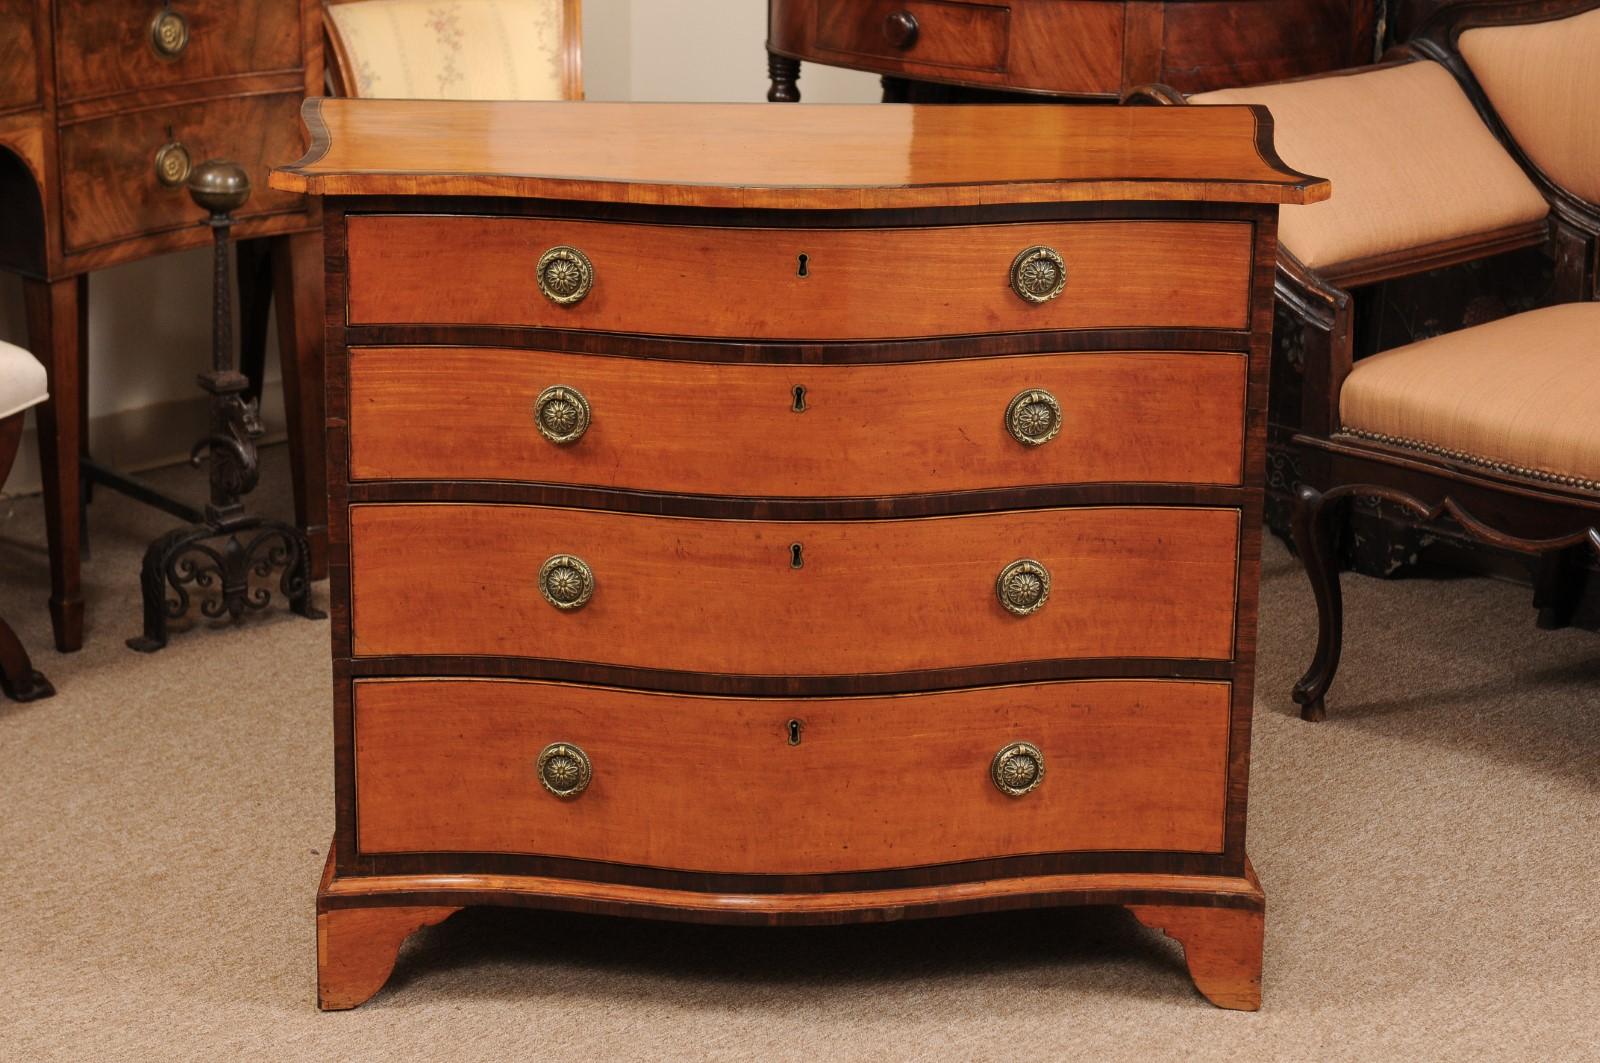 George III serpentine form chest of drawers in satinwood with four (4) drawers and bracket feet, England, early 19th century.